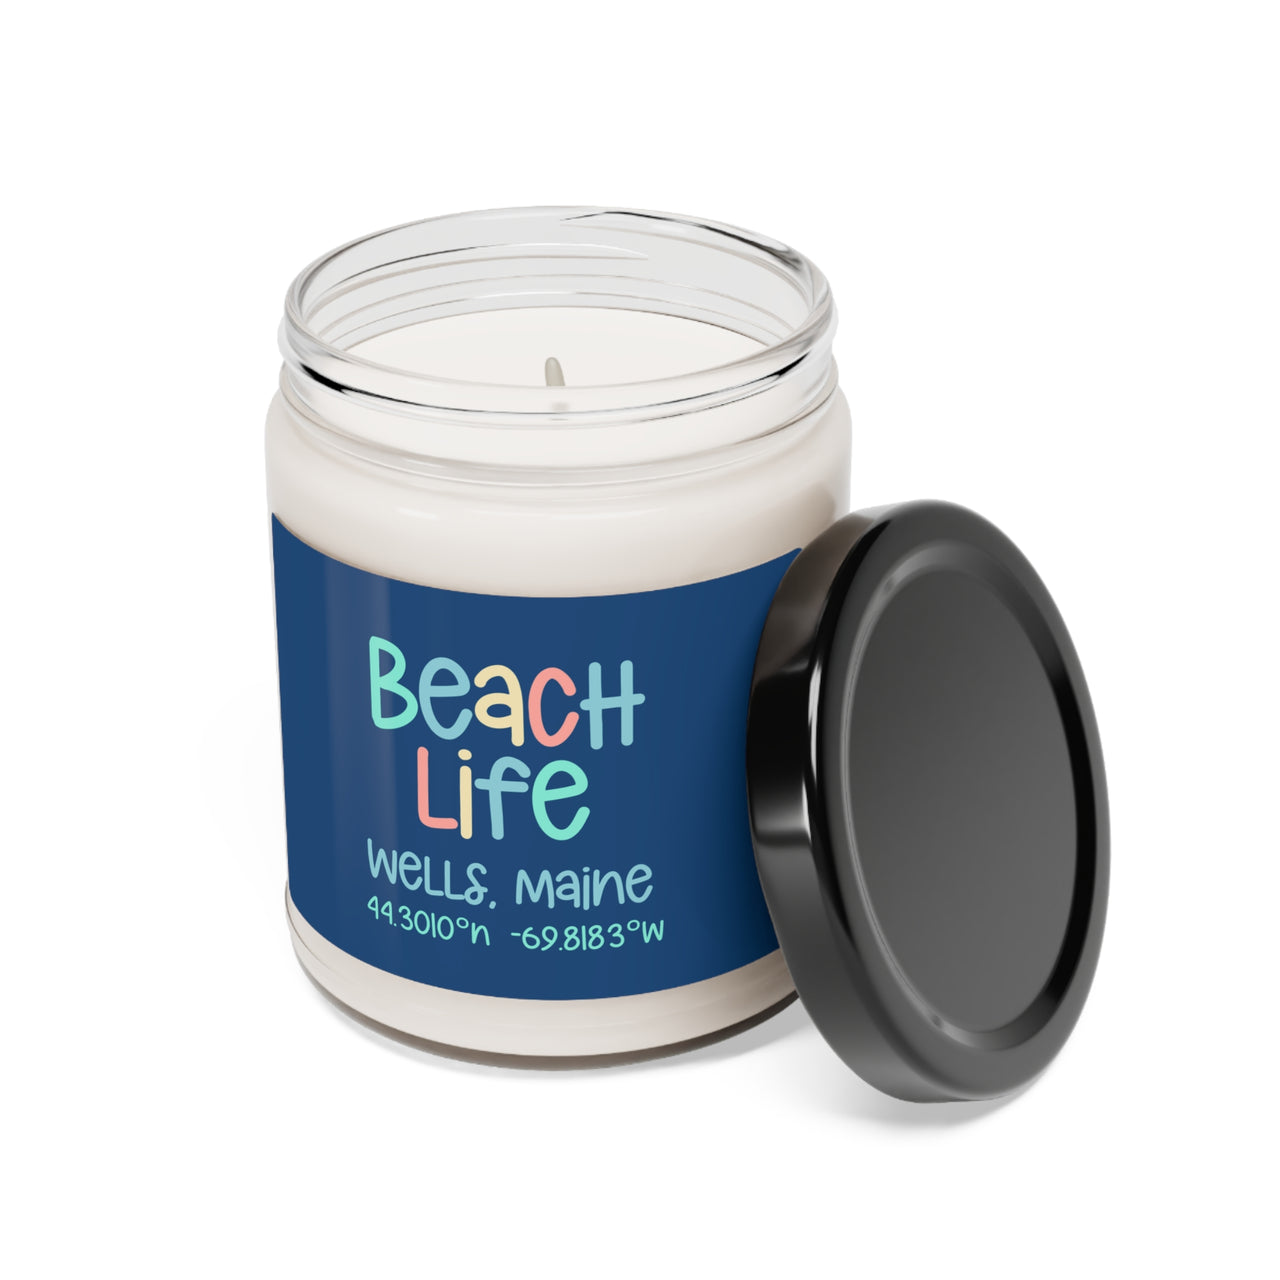 Beach Life Scented Soy Candle, Coastal Candles, 4 Scents, With Reusable Glass Vessel